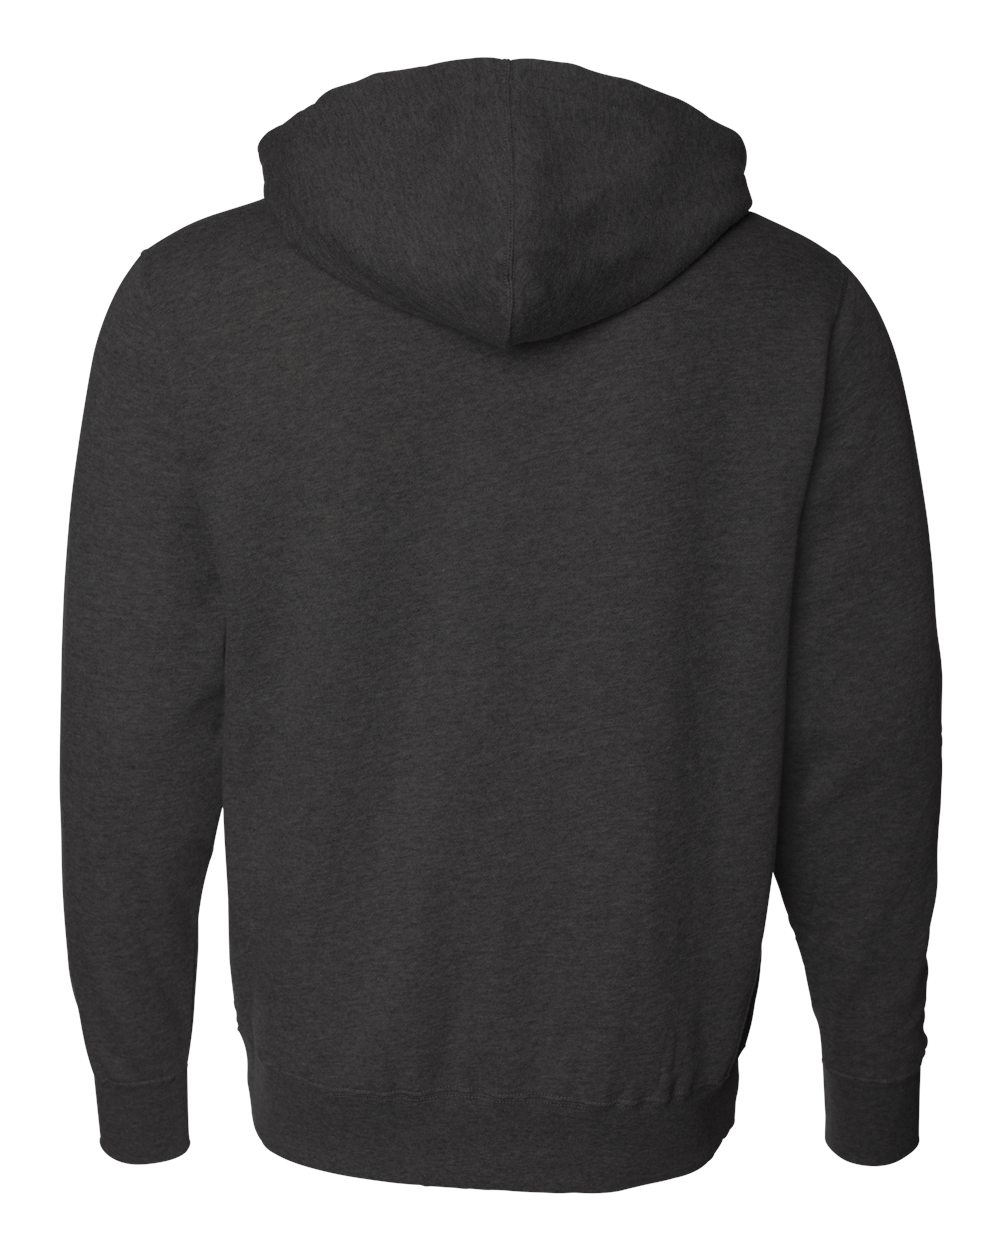 Independent Trading Co. AFX4000Z | Full-Zip Hooded Sweatshirt | ShirtSpace